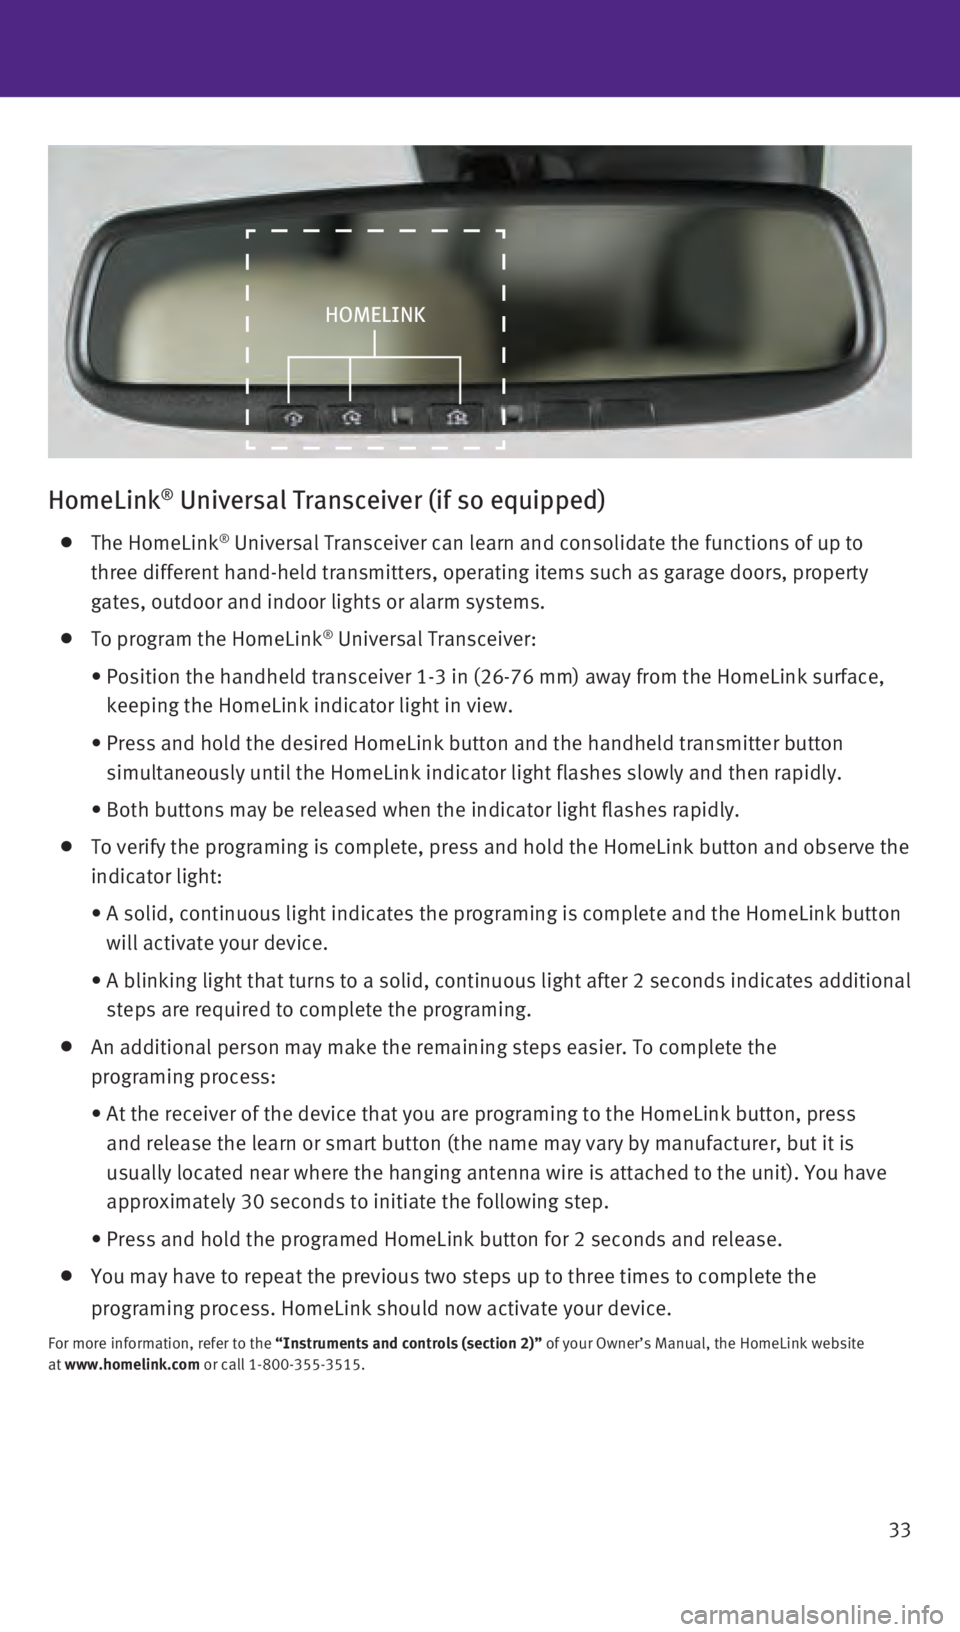 INFINITI QX60 2016  Quick Reference Guide 33
HomeLink® Universal Transceiver (if so equipped)
    The  HomeLink® Universal Transceiver can learn and consolidate the functions of up to \
three different hand-held transmitters, operating ite